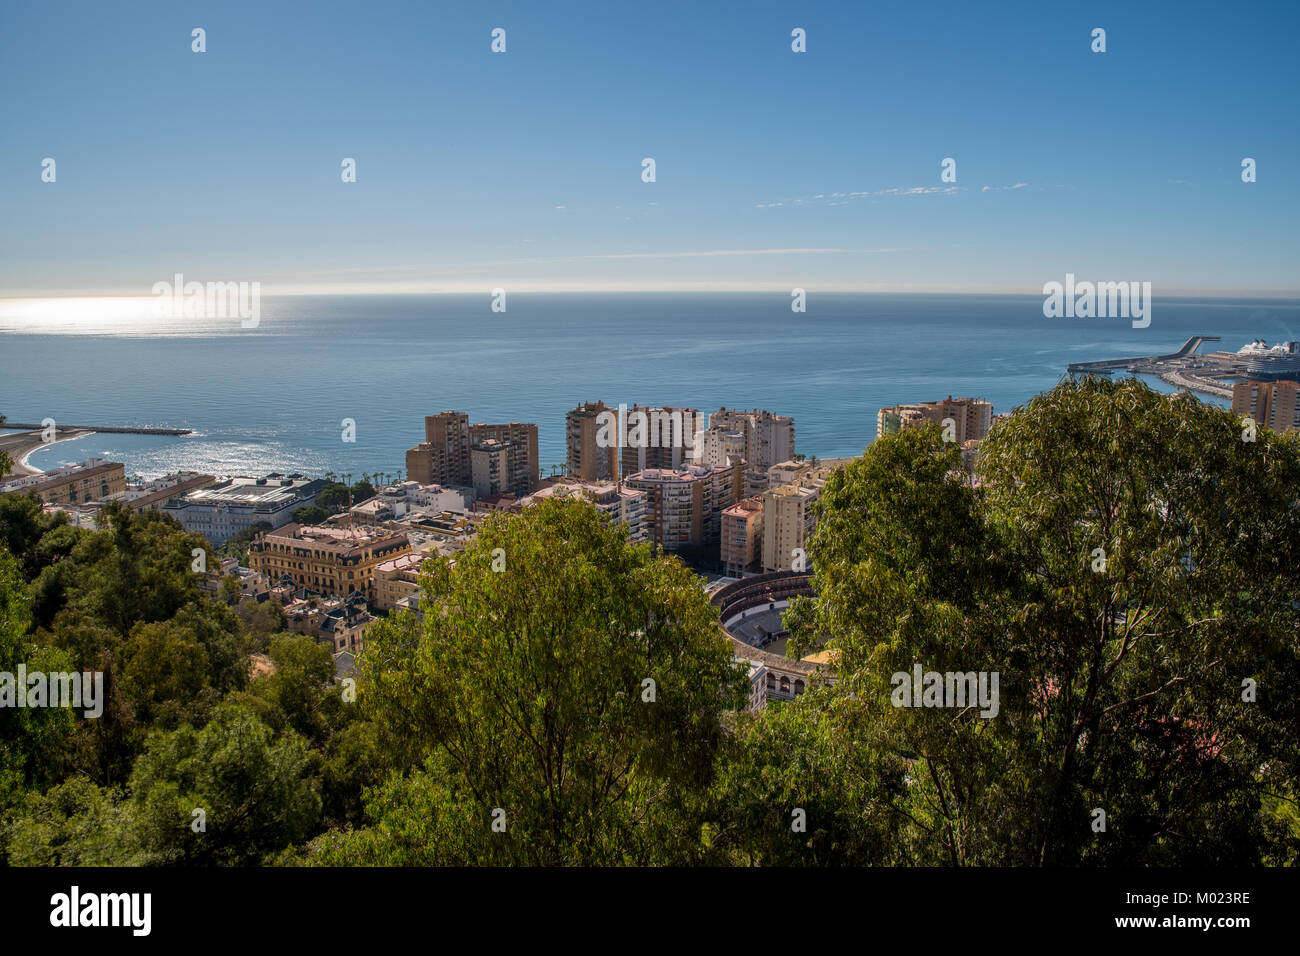 MALAGA, ANDALUSIA / SPAIN - OCTOBER 05 2017: VIEW OF THE CITY OF MALAGA Stock Photo